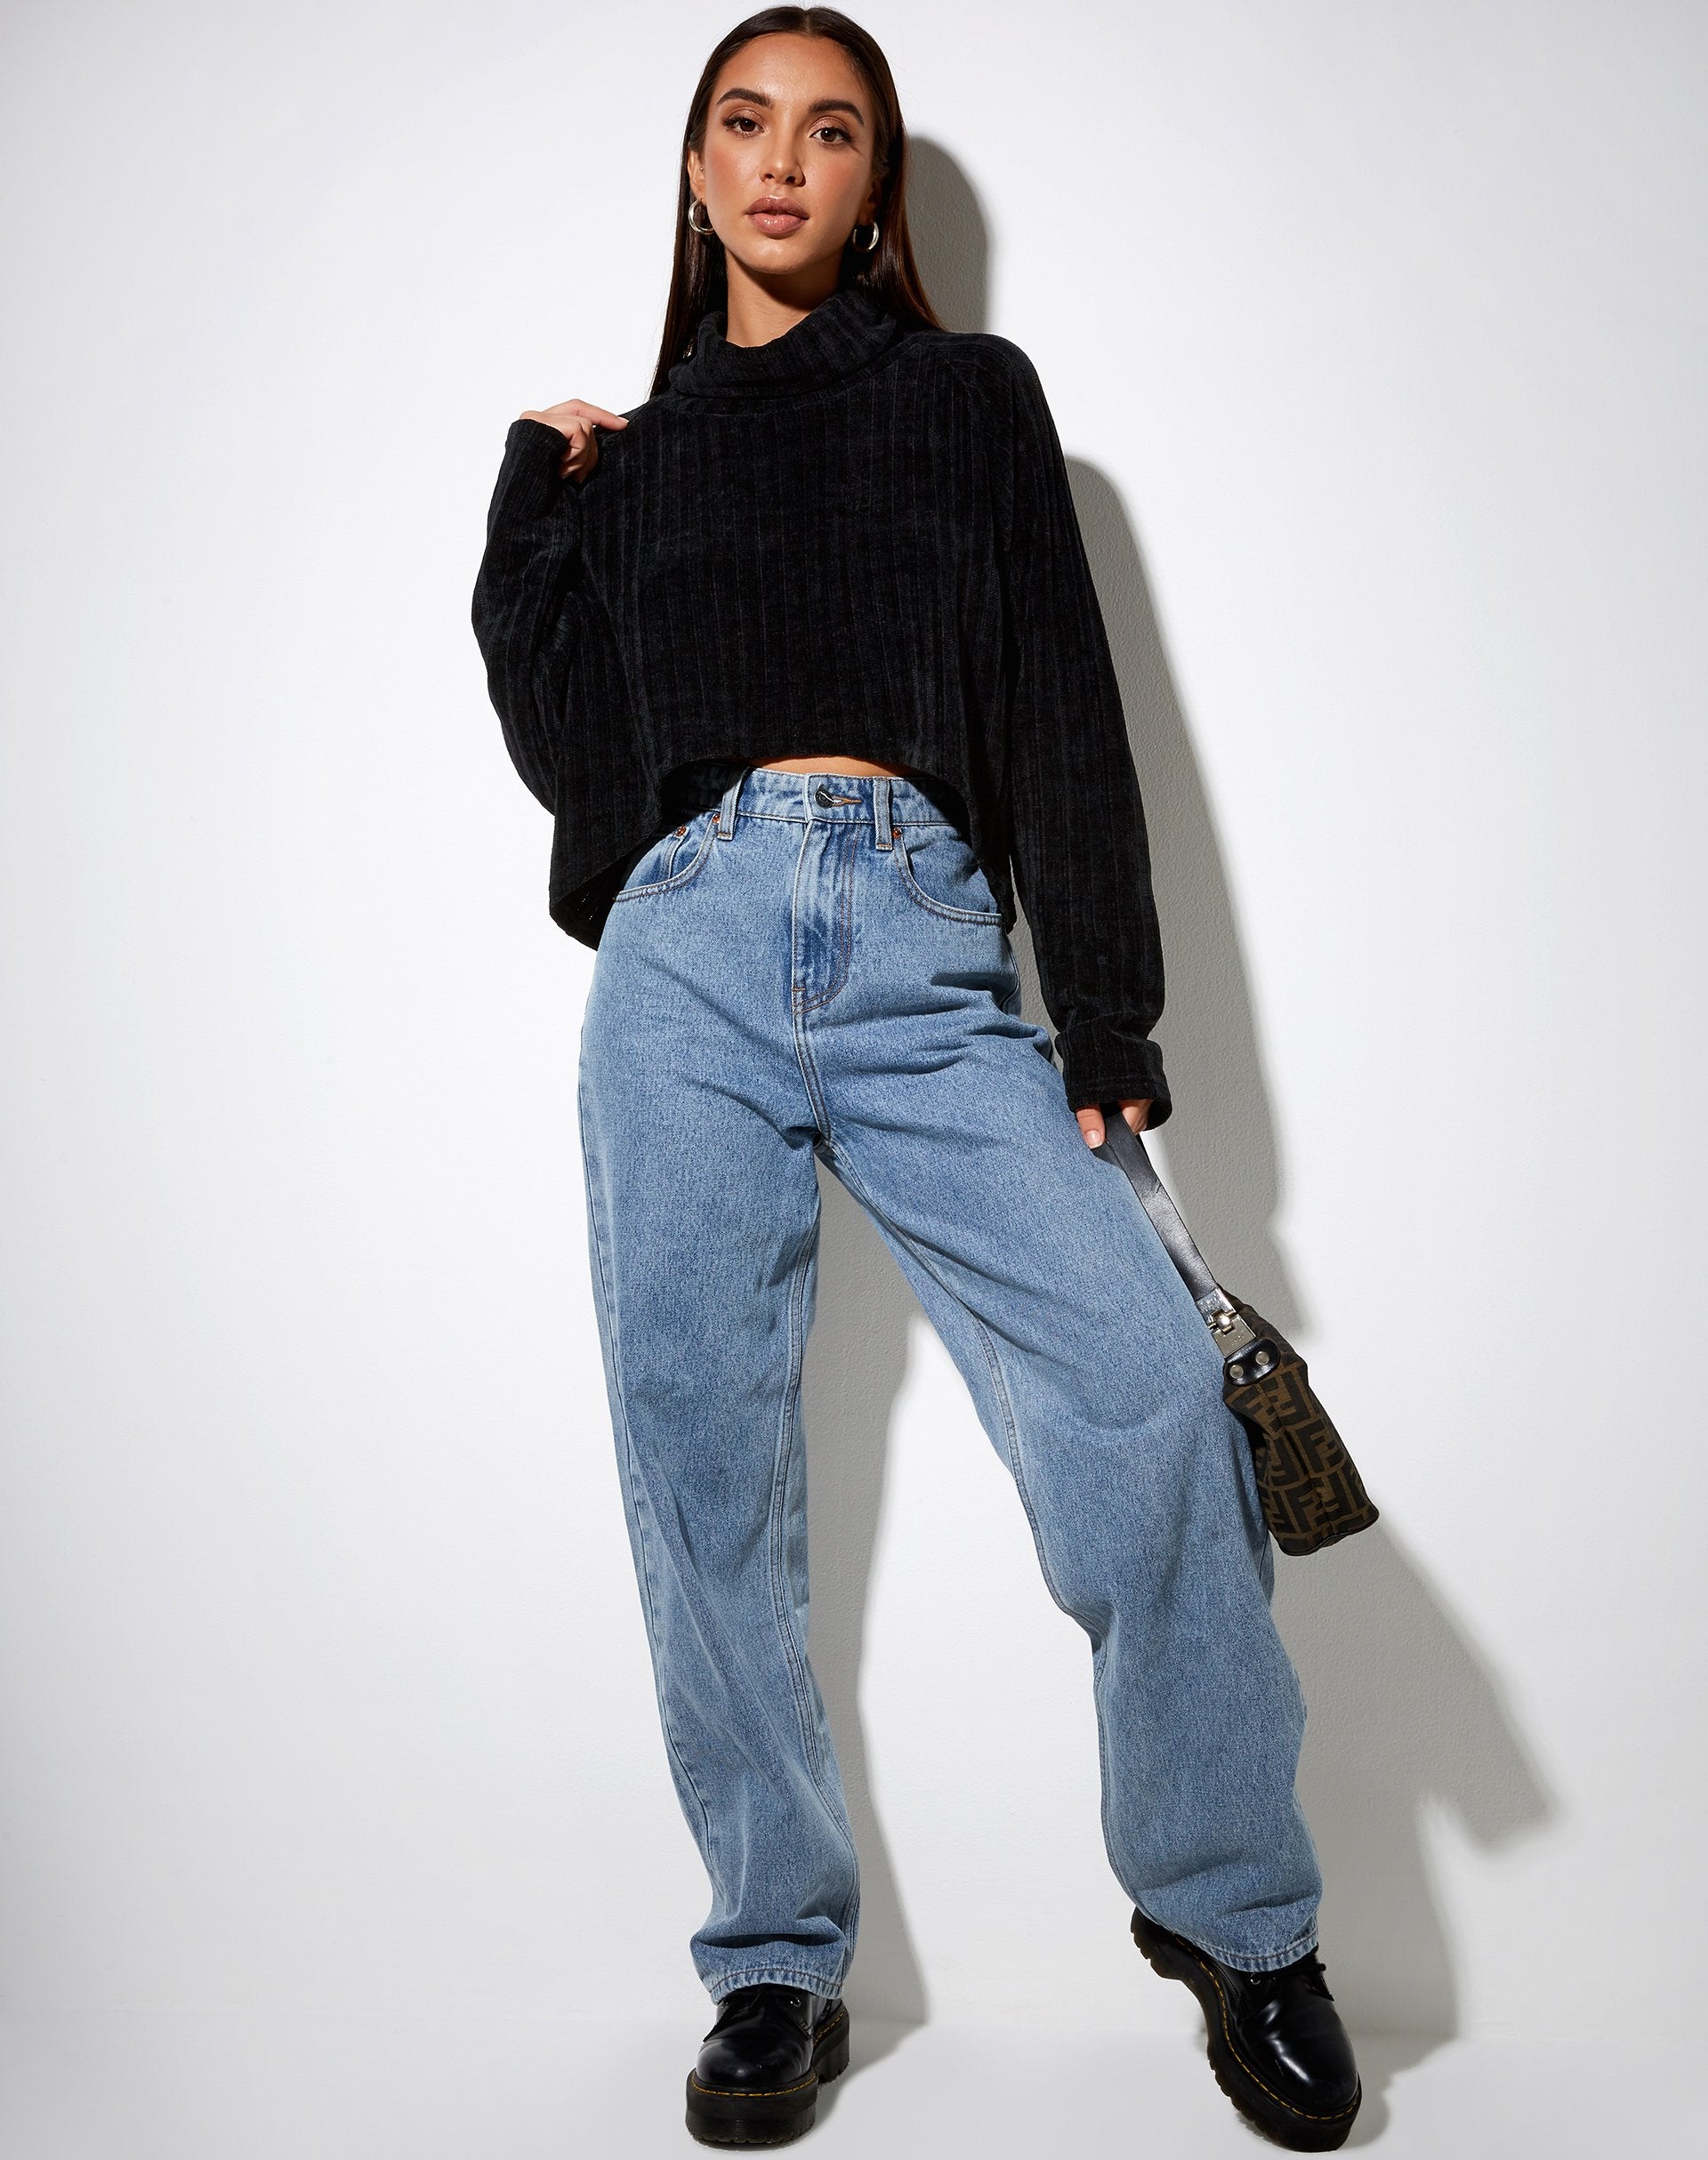 Image of Evie Cropped Jumper in Chenille Black